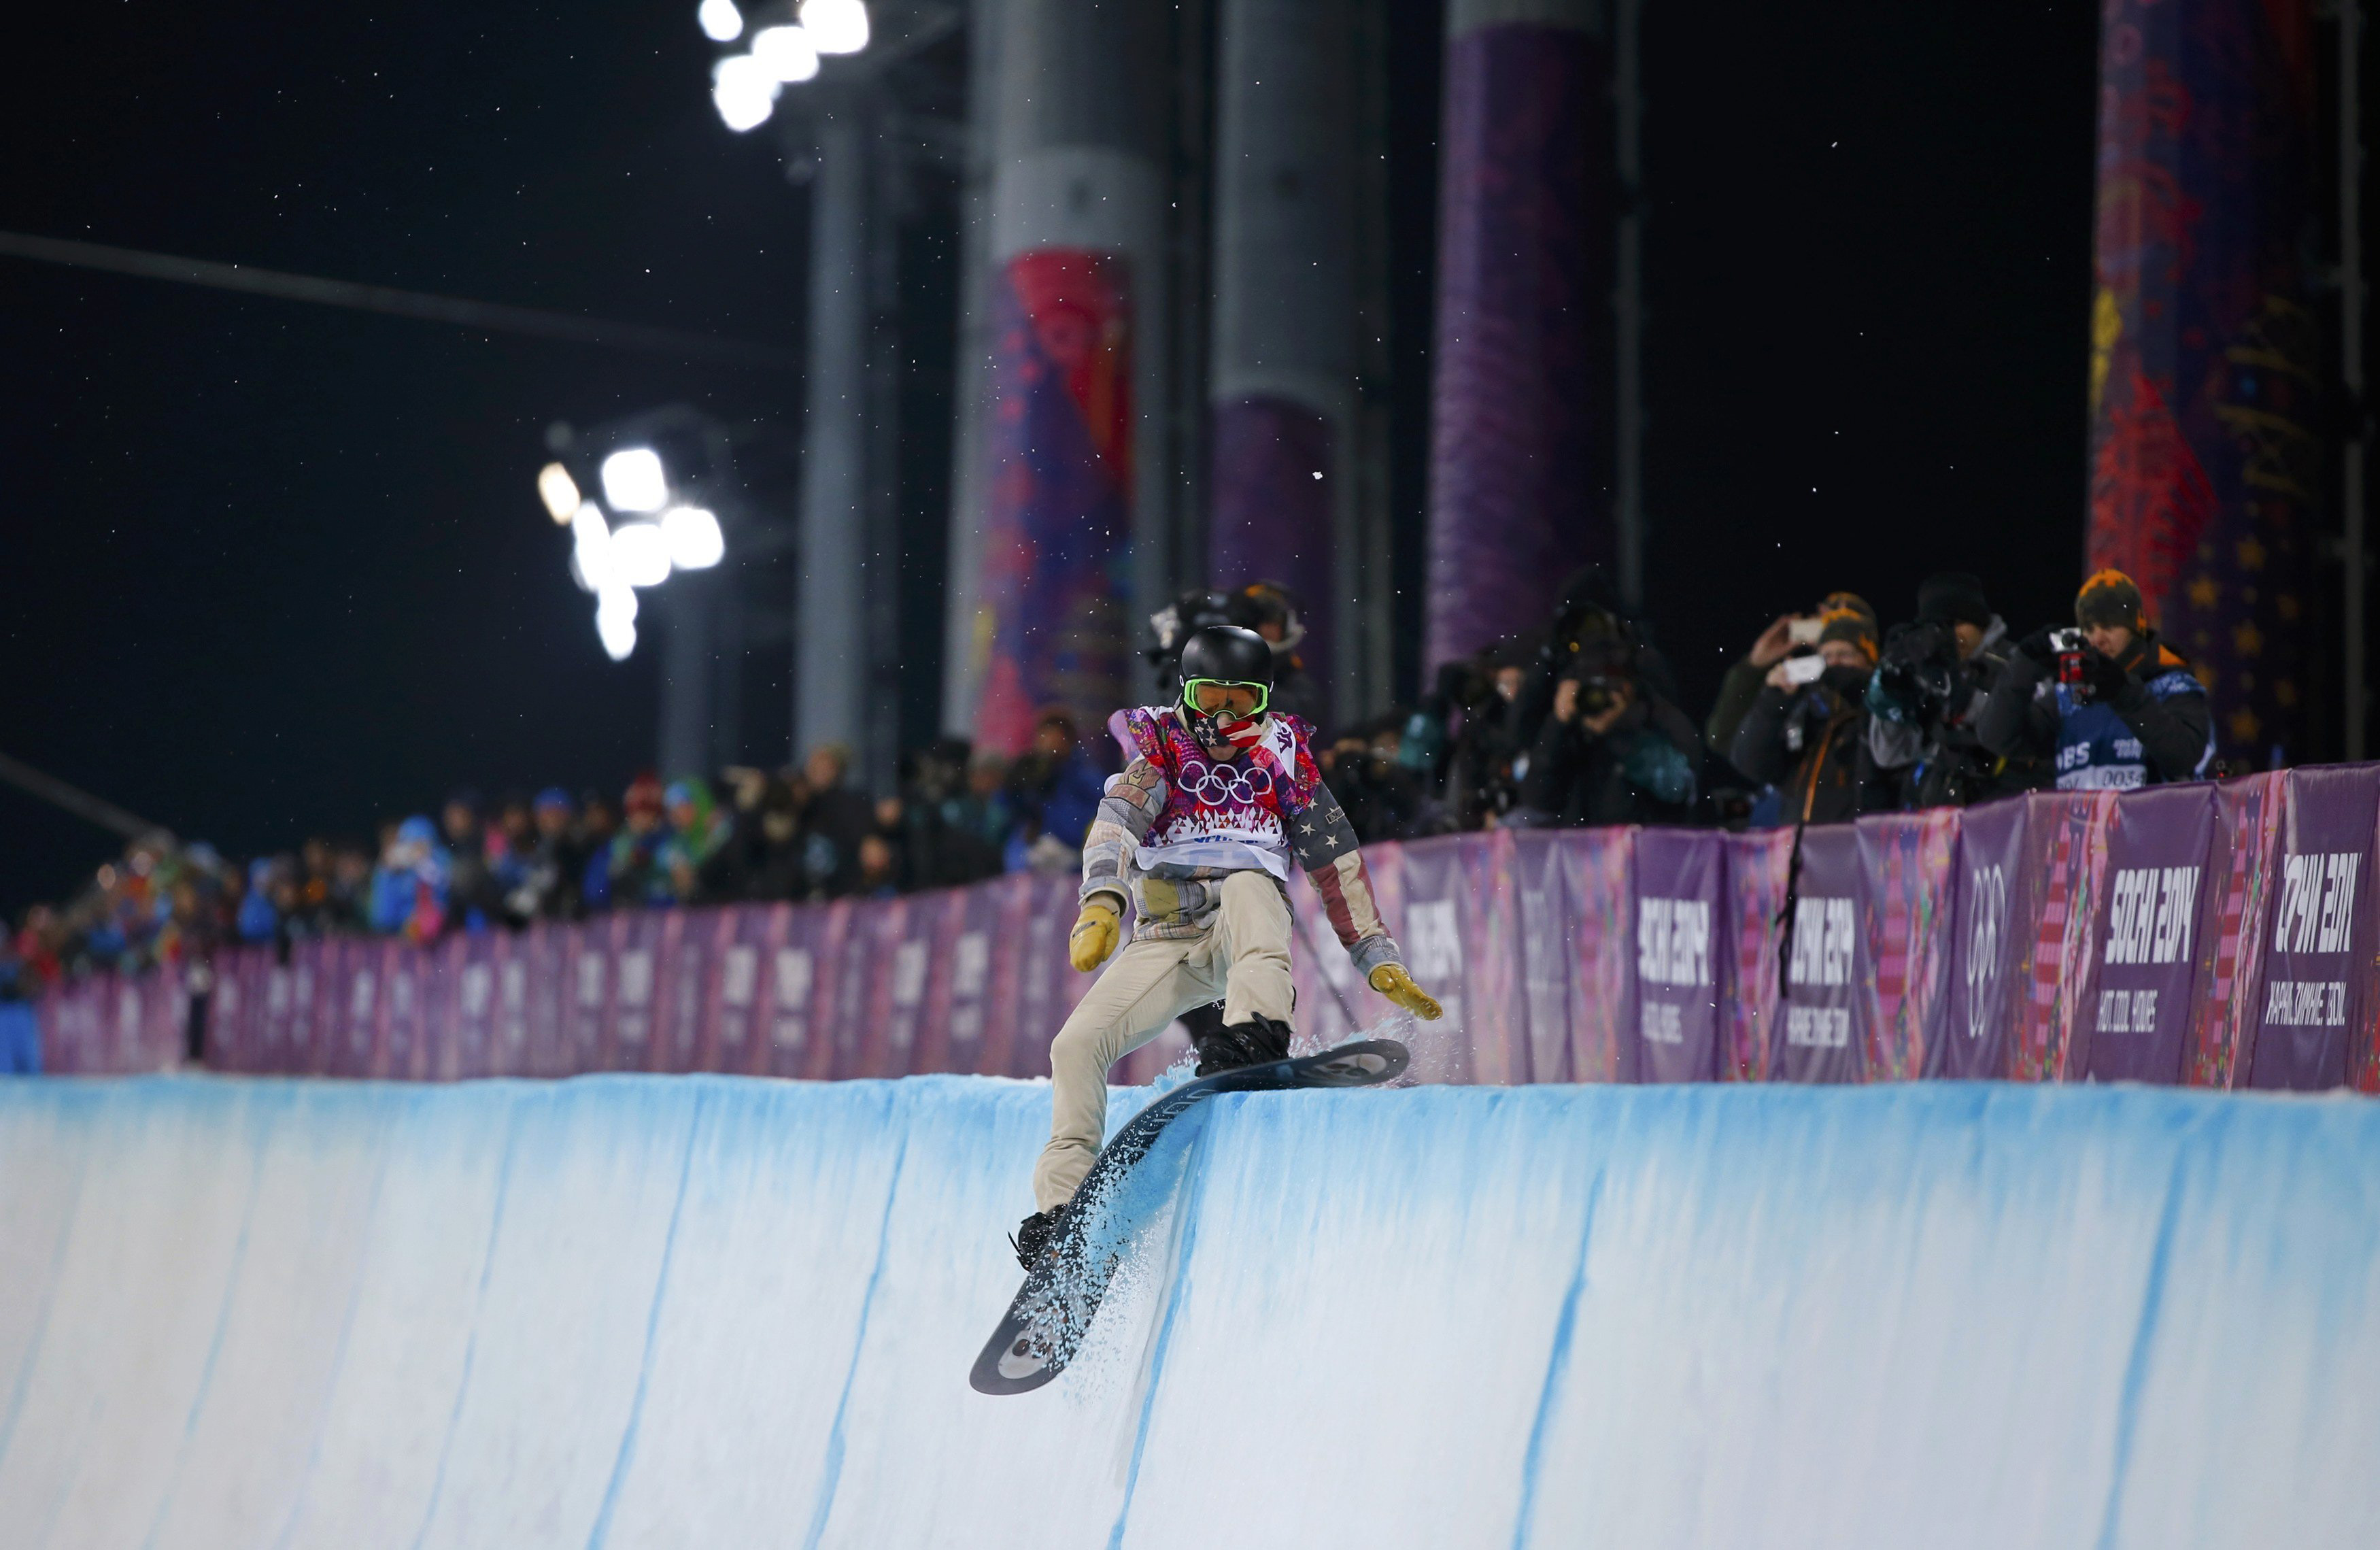 Shaun White of the U.S. crashes during the men's snowboard halfpipe final event. White finished in fourth place.